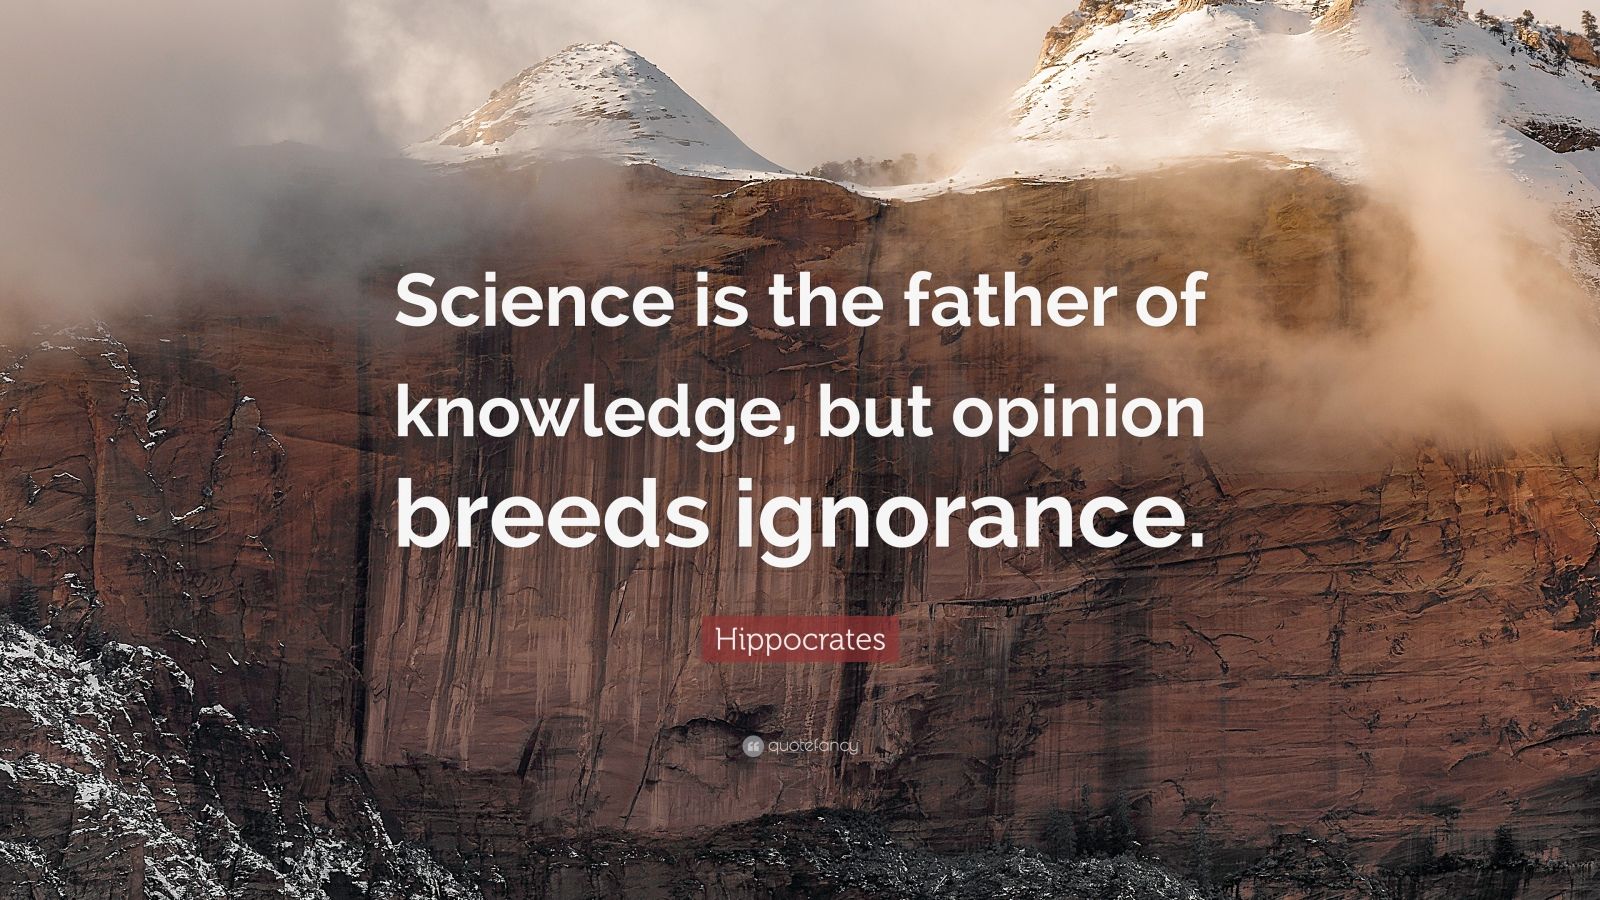 Hippocrates Quote: “Science is the father of knowledge, but opinion